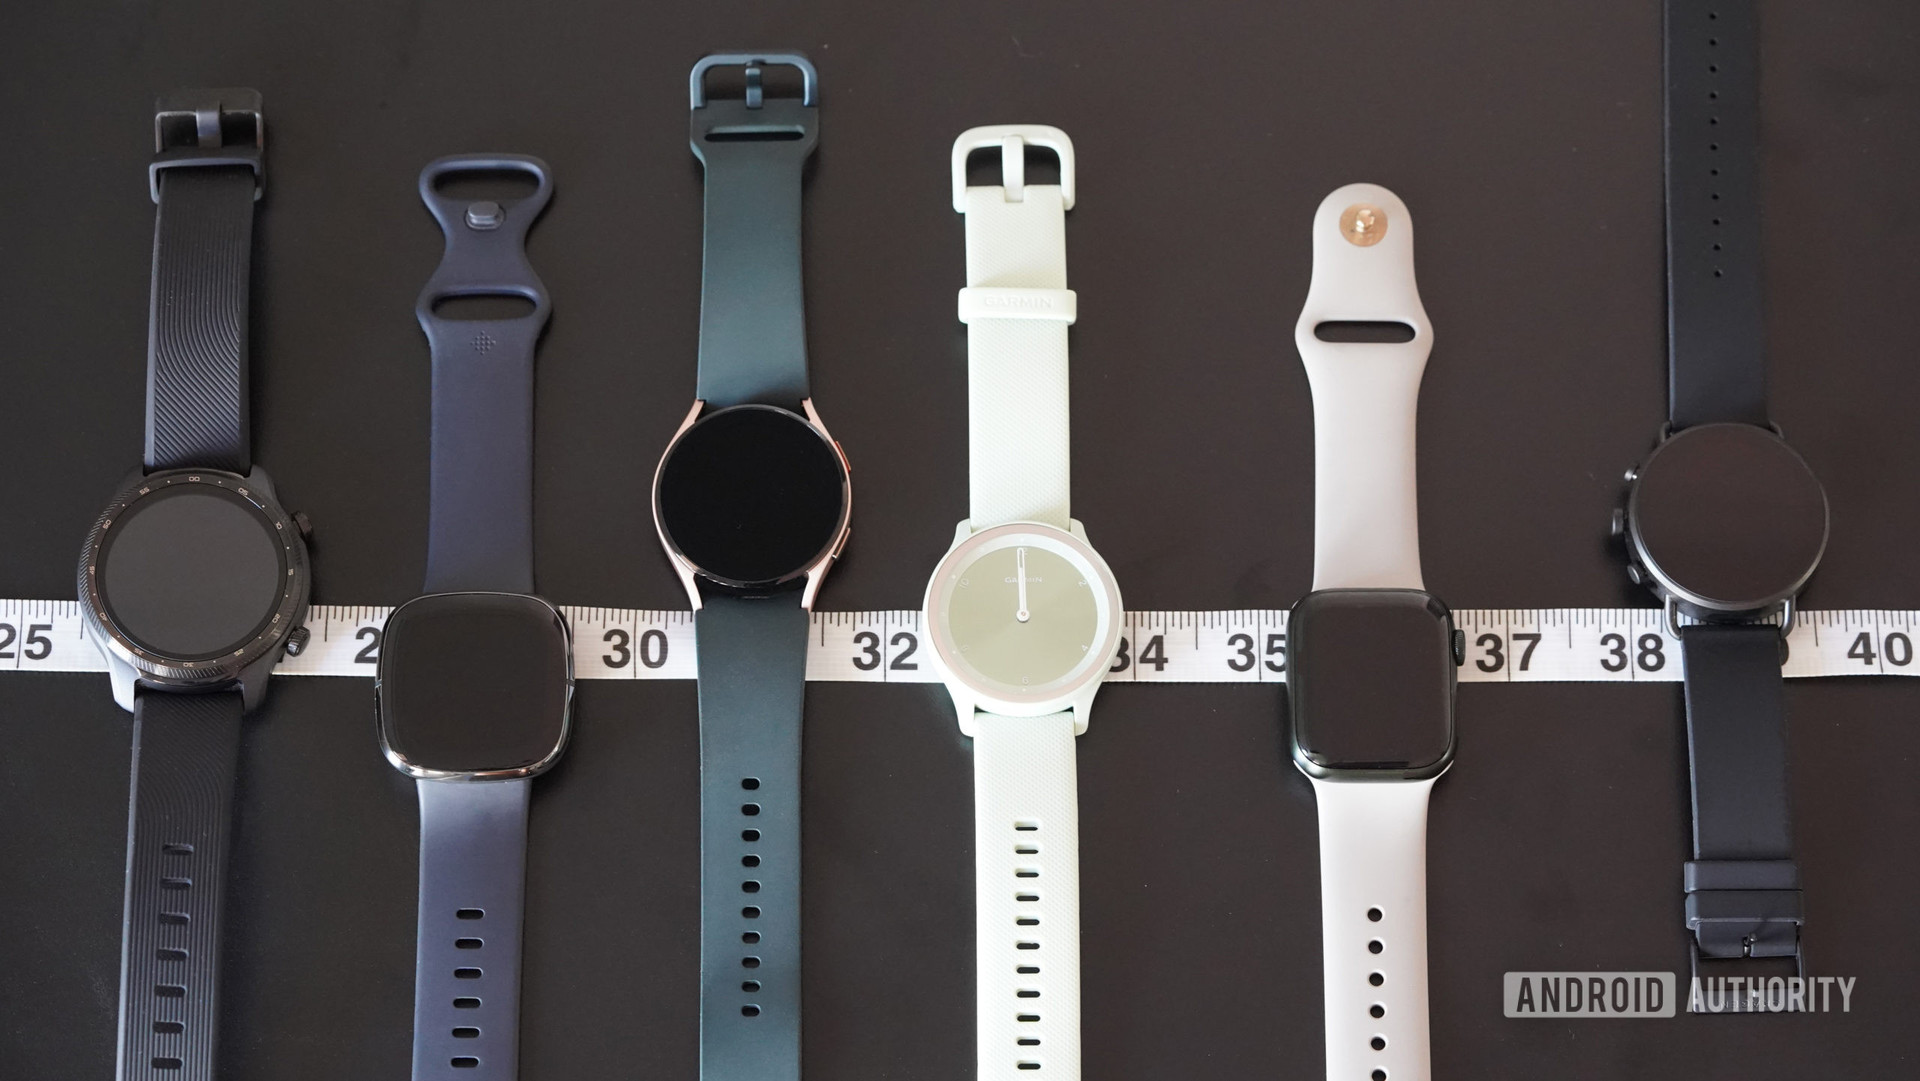 A variety of smartwatches, including the Apple Watch Series 7, Galaxy Watch 4, Garmin vivomove Sport, and more rest side by side along a measuring tape.